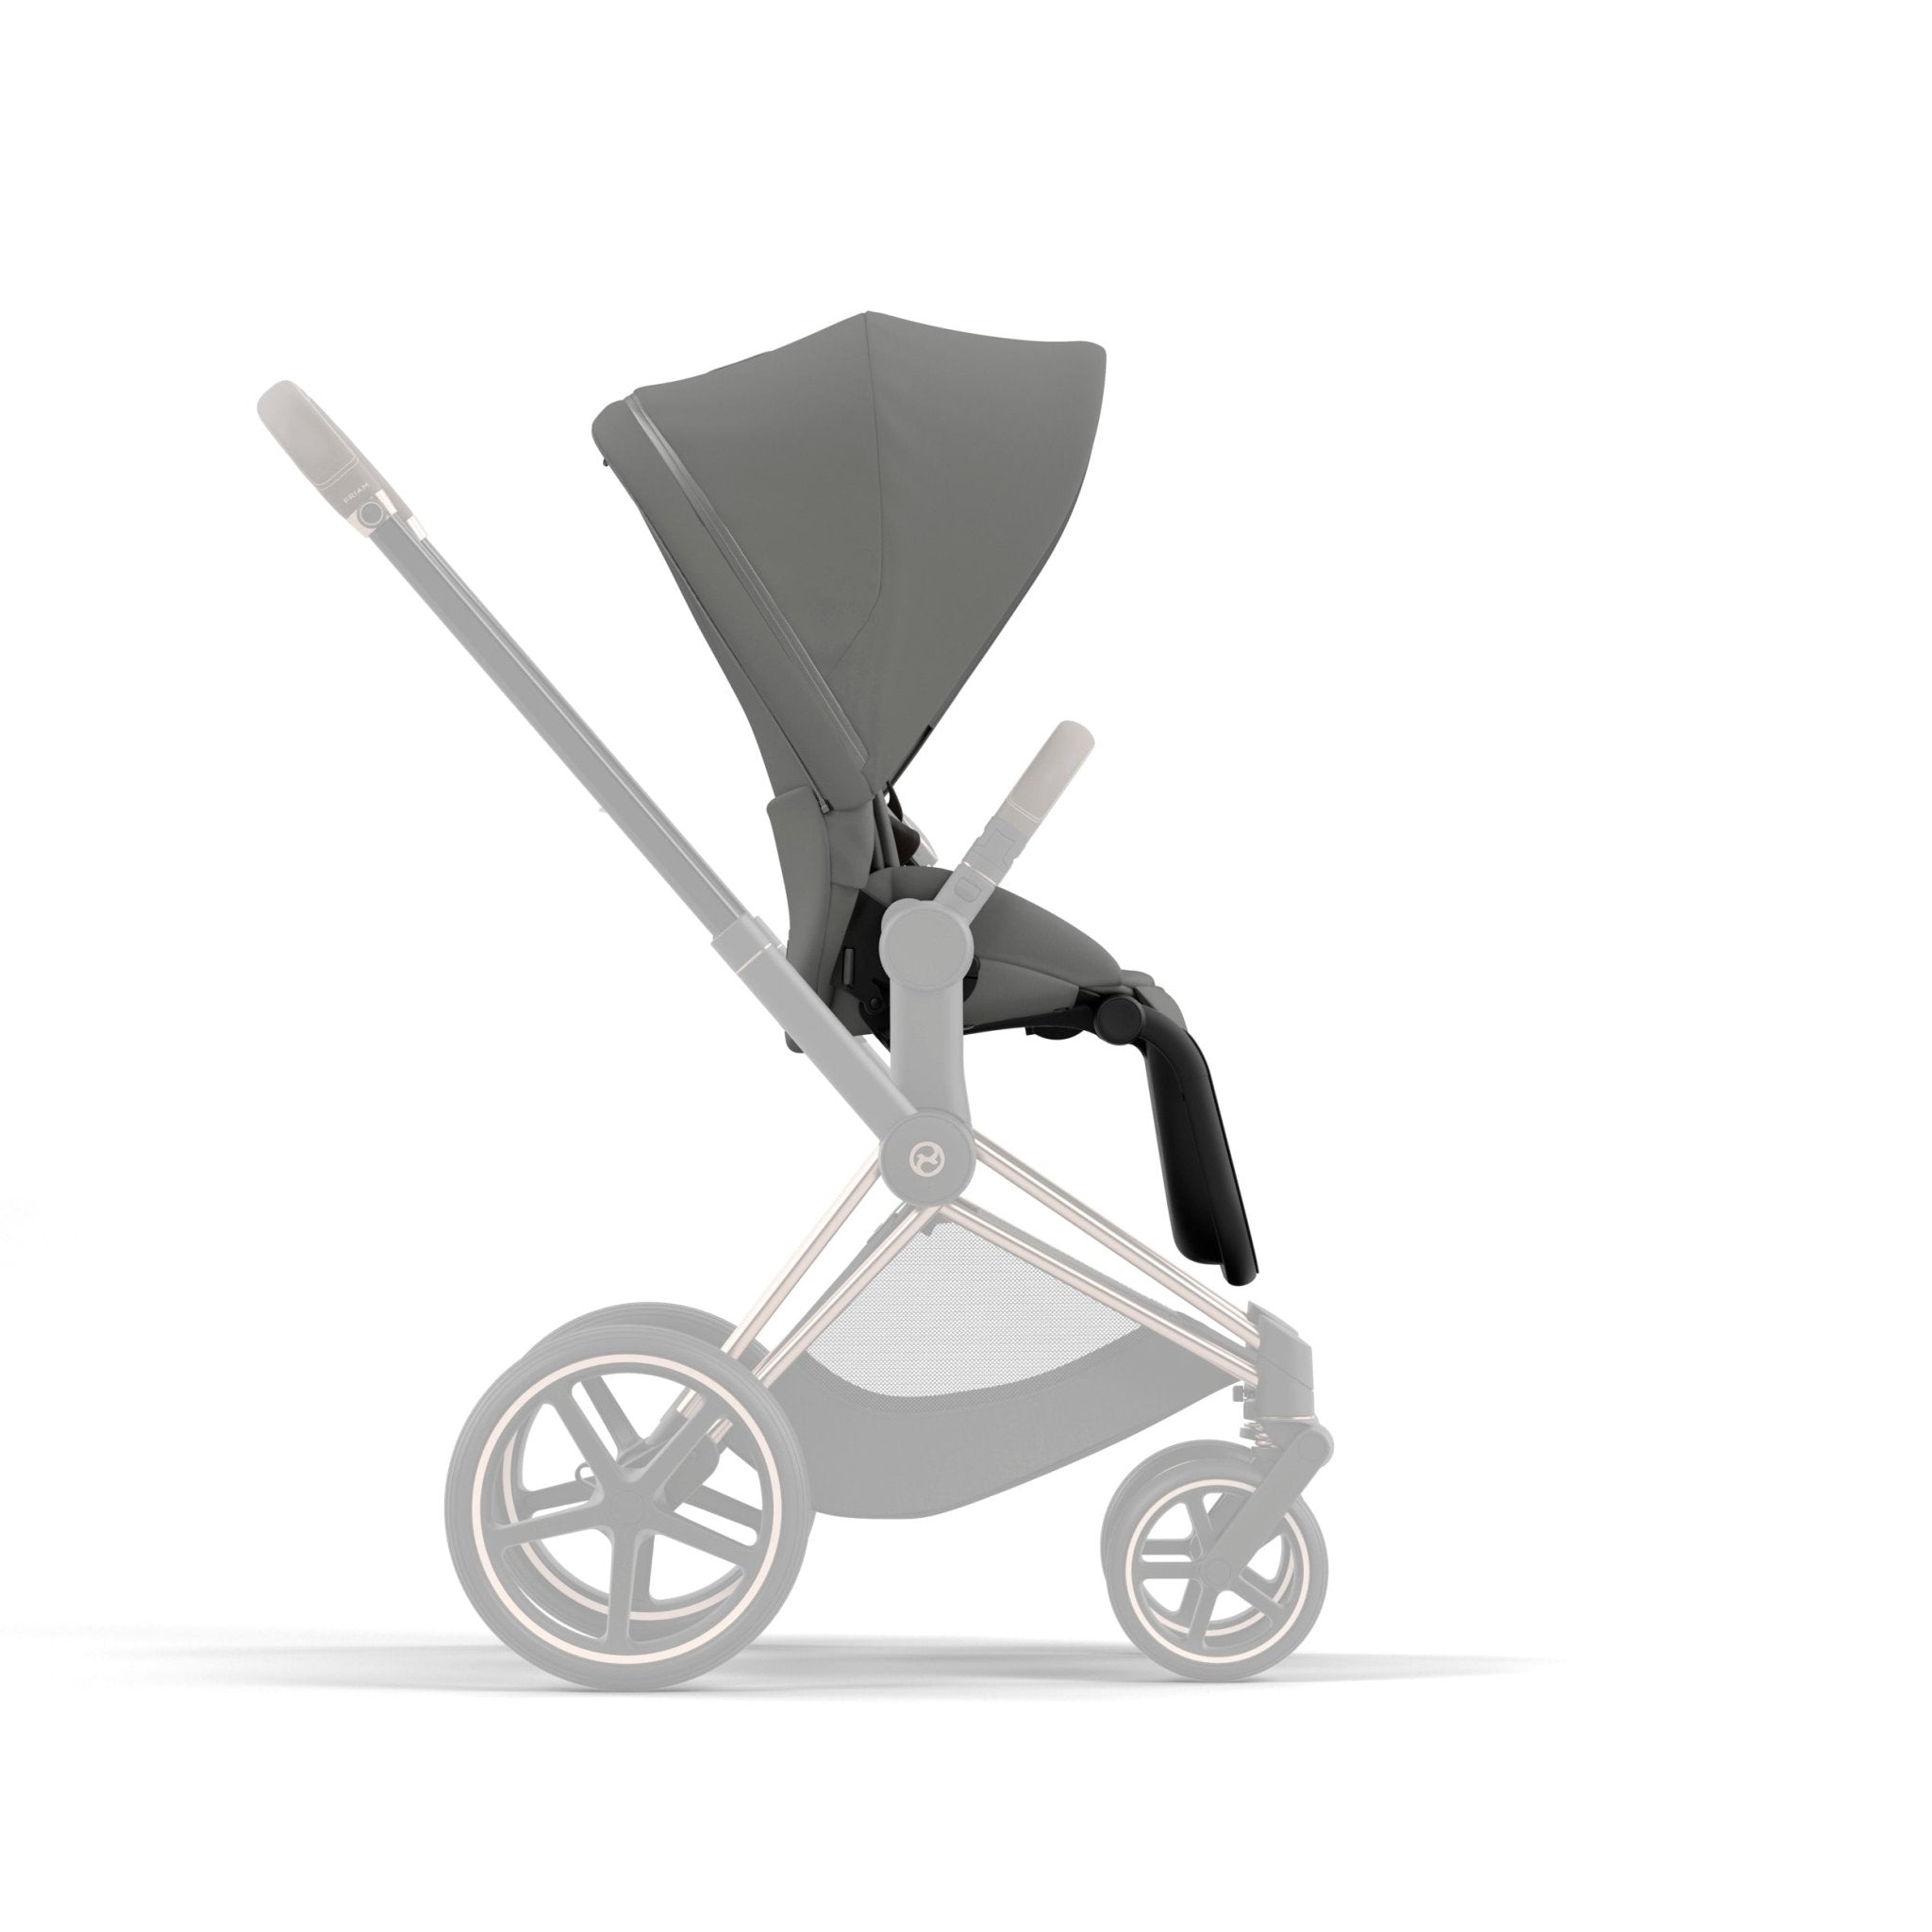 Cybex Priam4 / eP4 Seat Sustainable Fabric - ANB Baby -$100 - $300